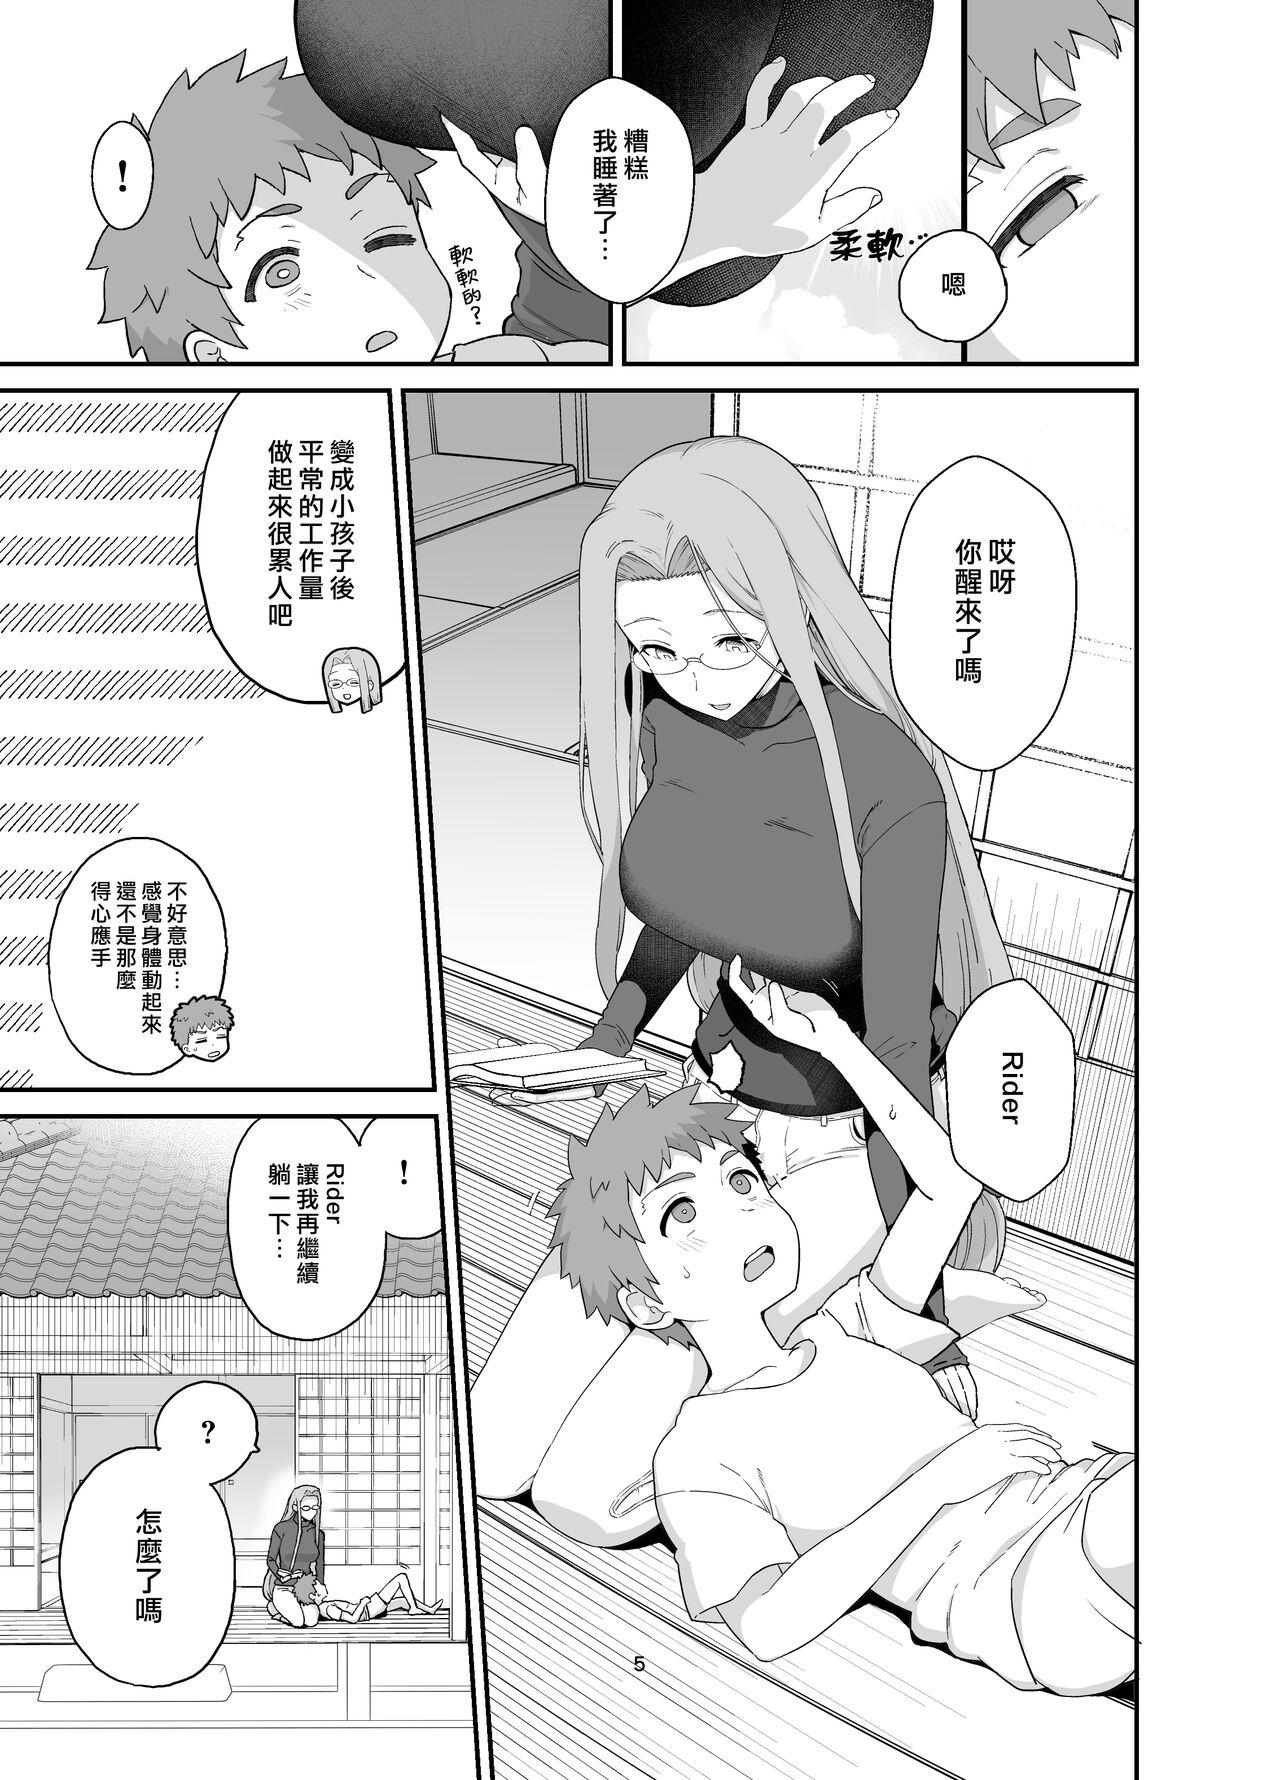 Culos Rider-san to Orusuban - Fate stay night Firsttime - Page 8